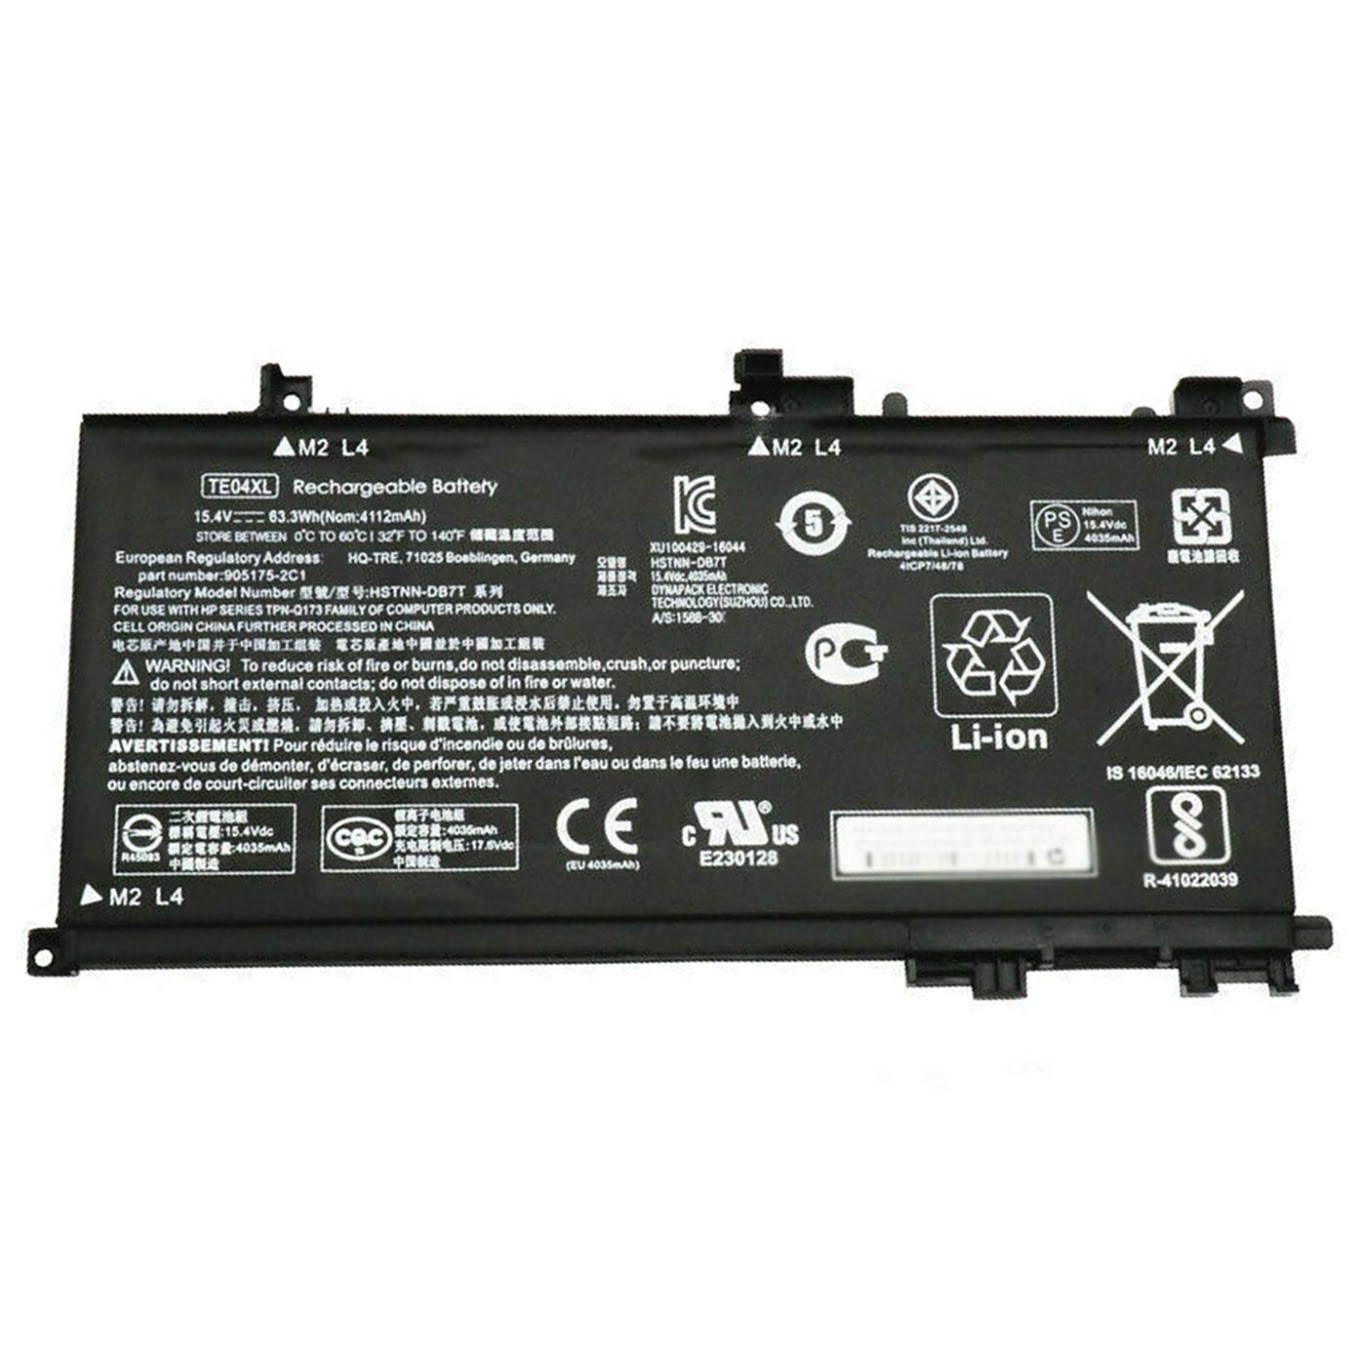 905175-271, 905175-2C1 replacement Laptop Battery for HP Omen 15-AX200NA, Omen 15-AX200NX, 15.4v, 63.3wh